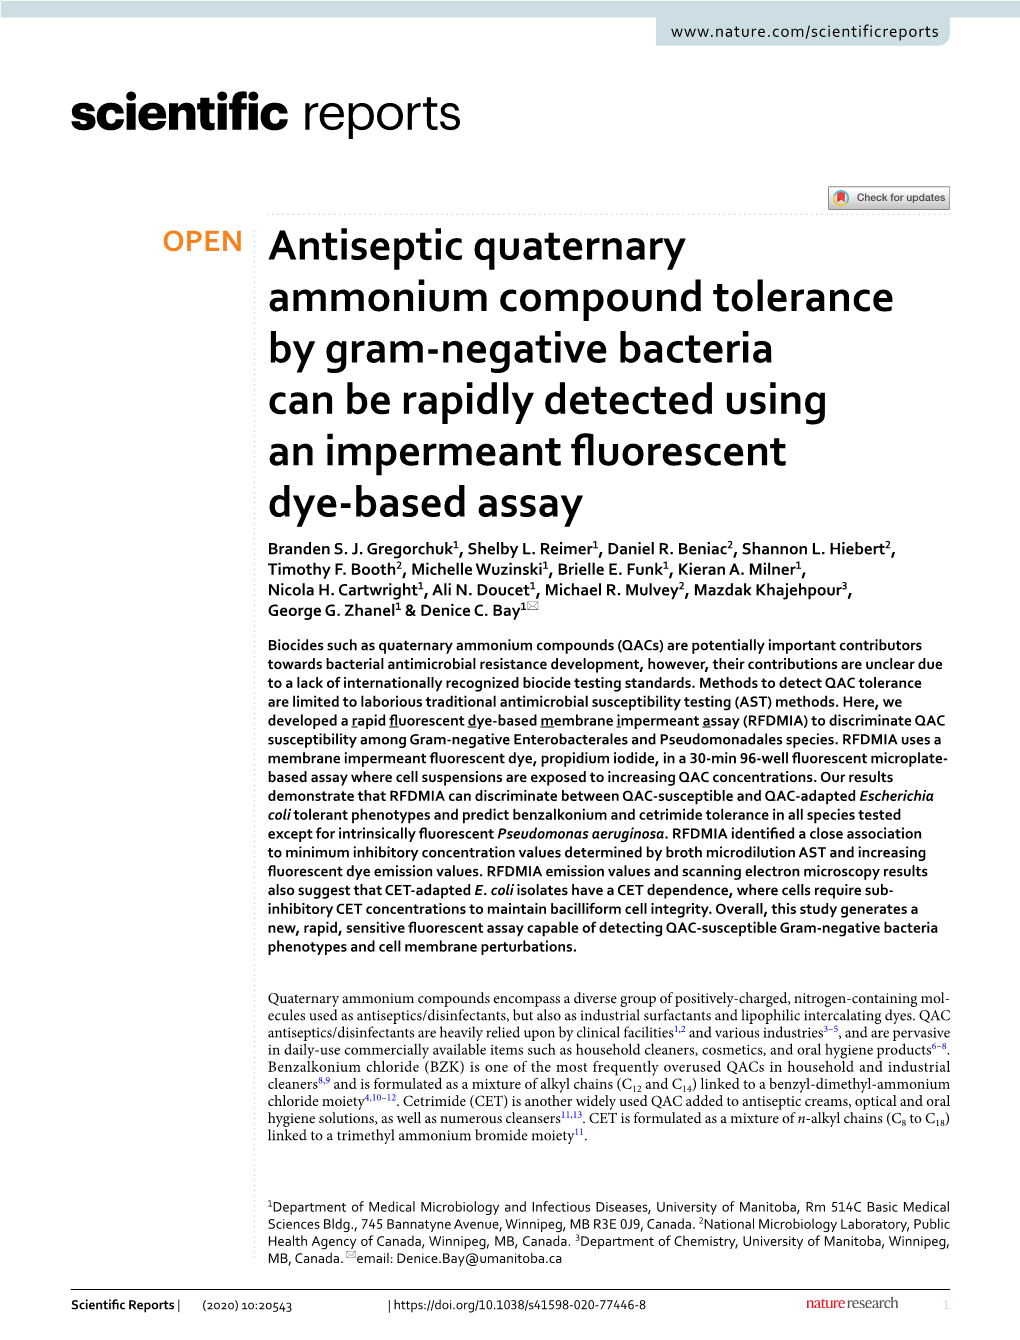 Antiseptic Quaternary Ammonium Compound Tolerance by Gram-Negative Bacteria Can Be Rapidly Detected Using an Impermeant Fluoresc